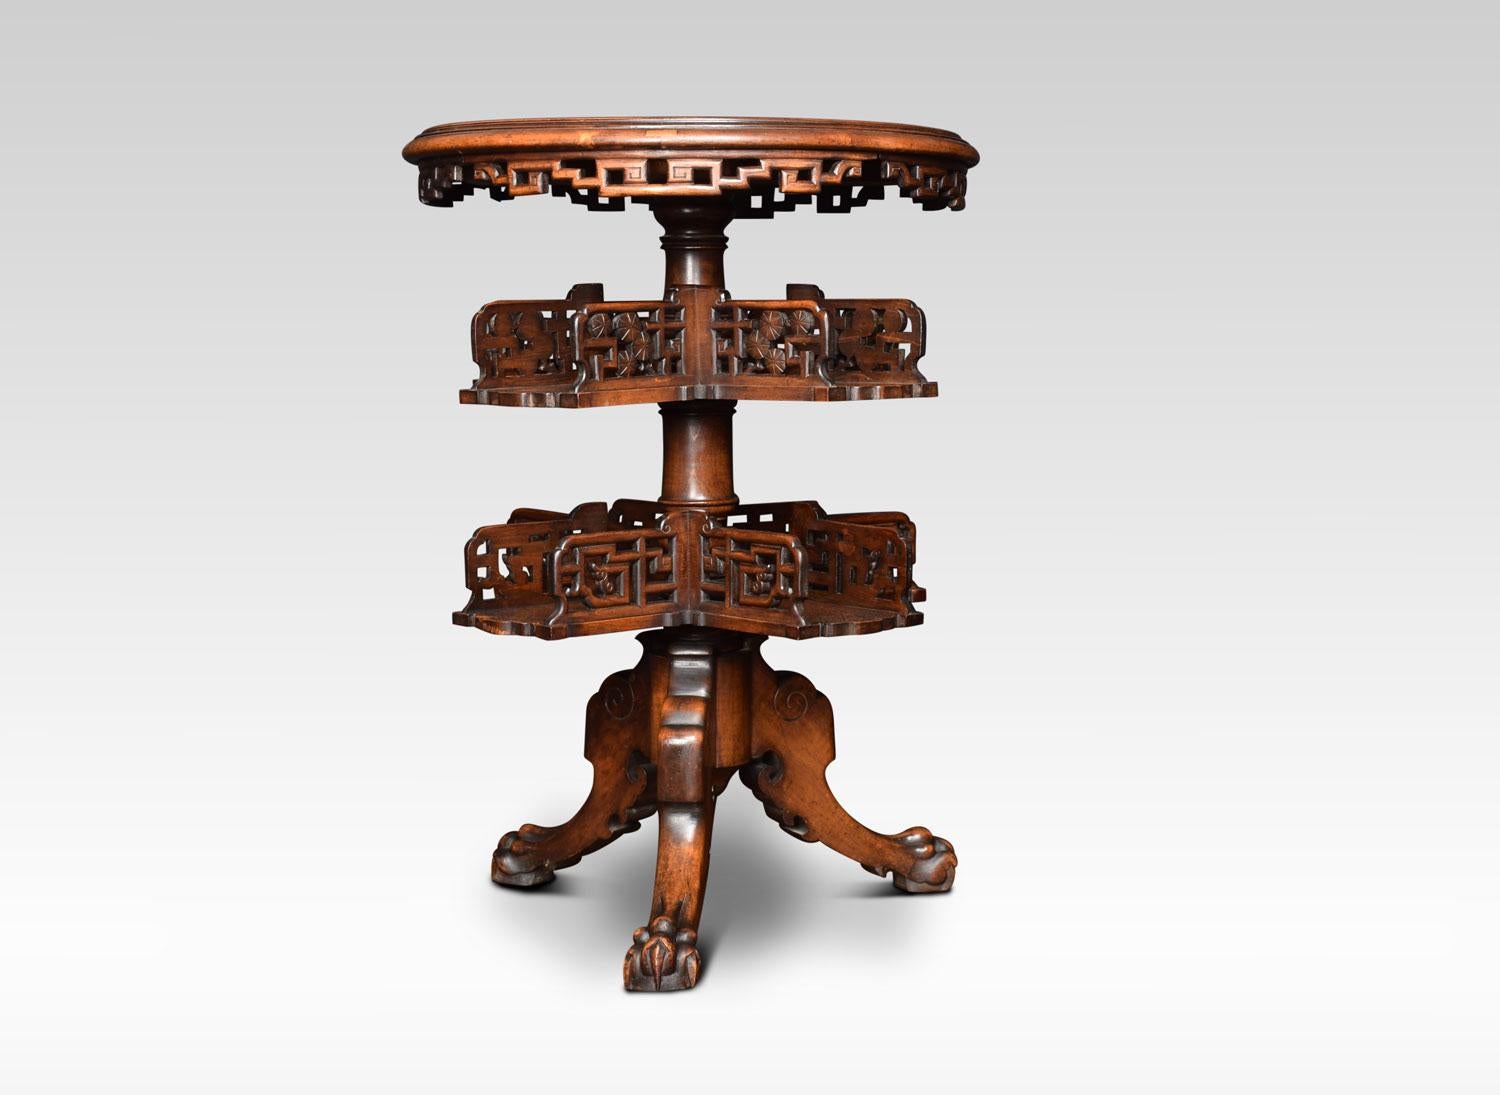 Chinese hardwood revolving book table the circular inset marble top above two tiers of pierced book shelves. All raised up on lion paw feet.
Dimensions
Height 30 inches
Width 21.5 inches
Depth 21.5 inches.